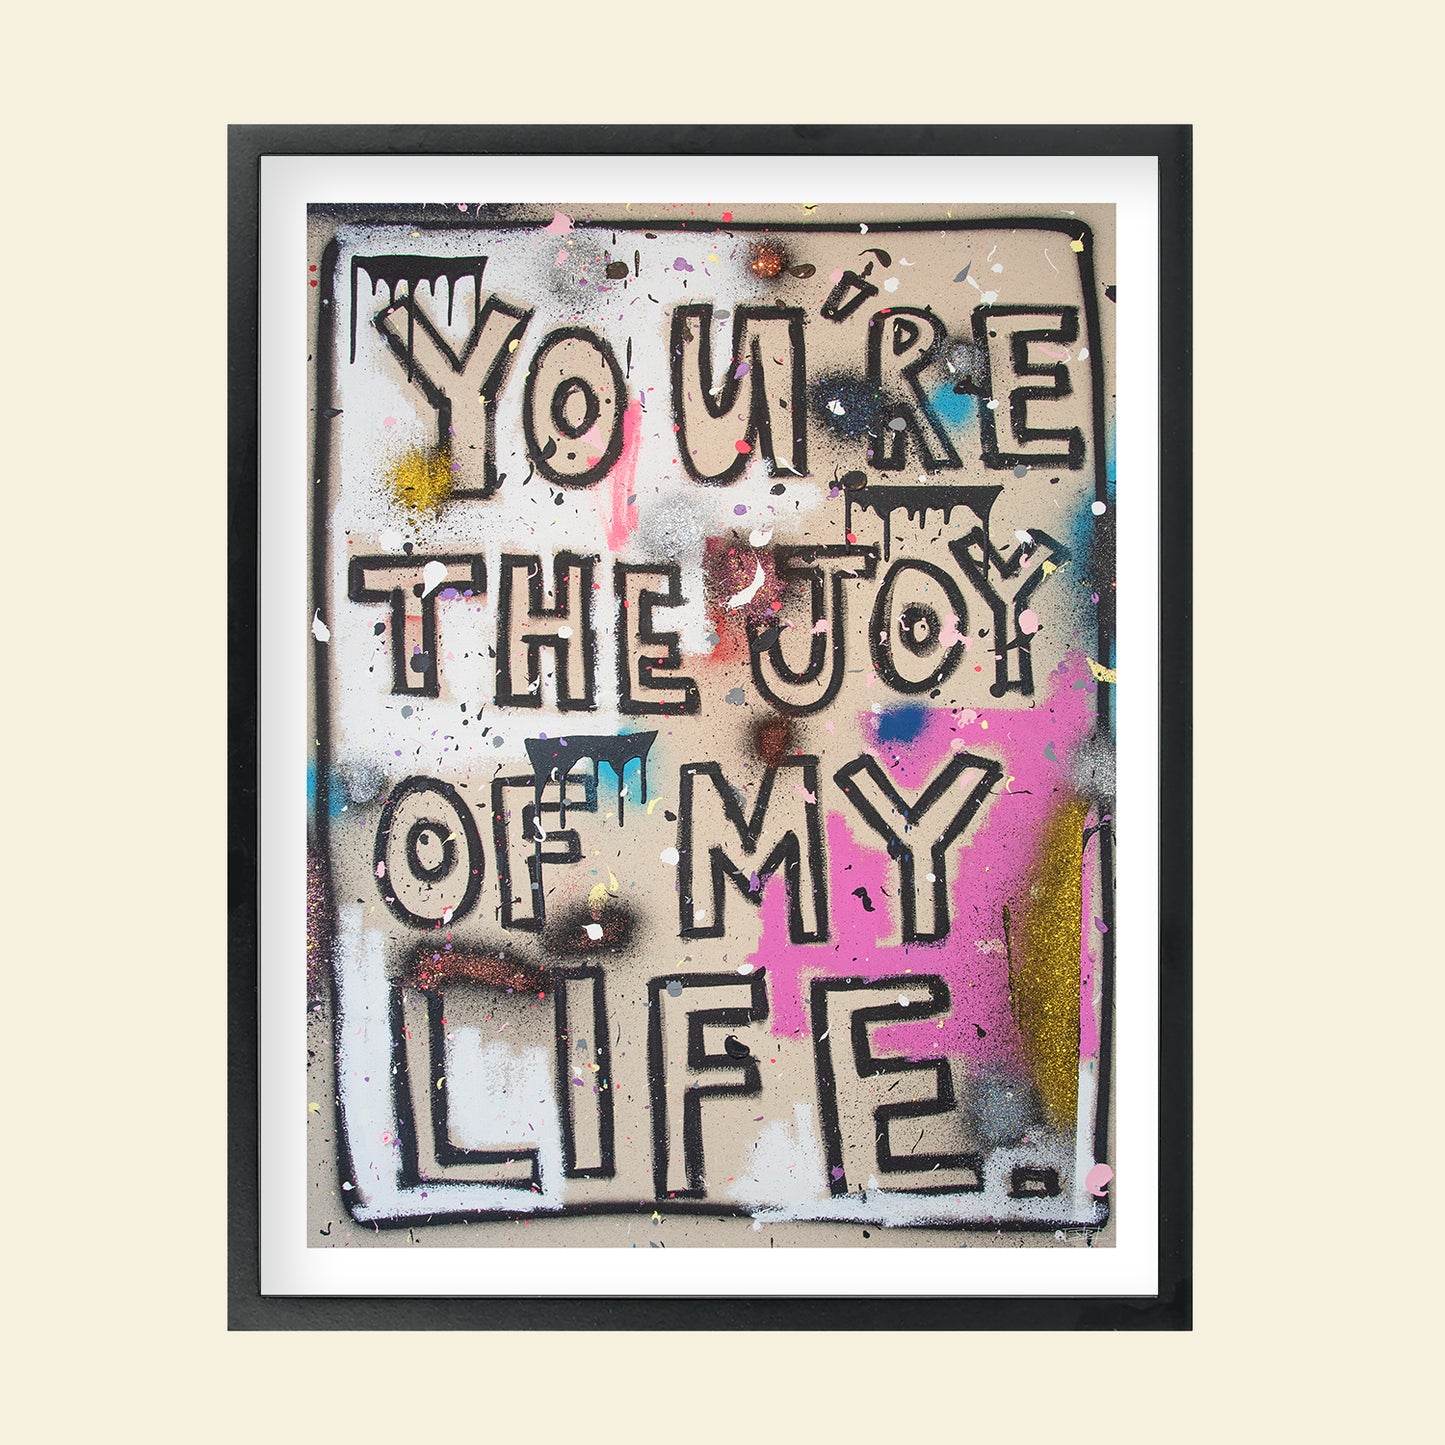 Jeremy Brown - "You Are The Joy Of My Life"